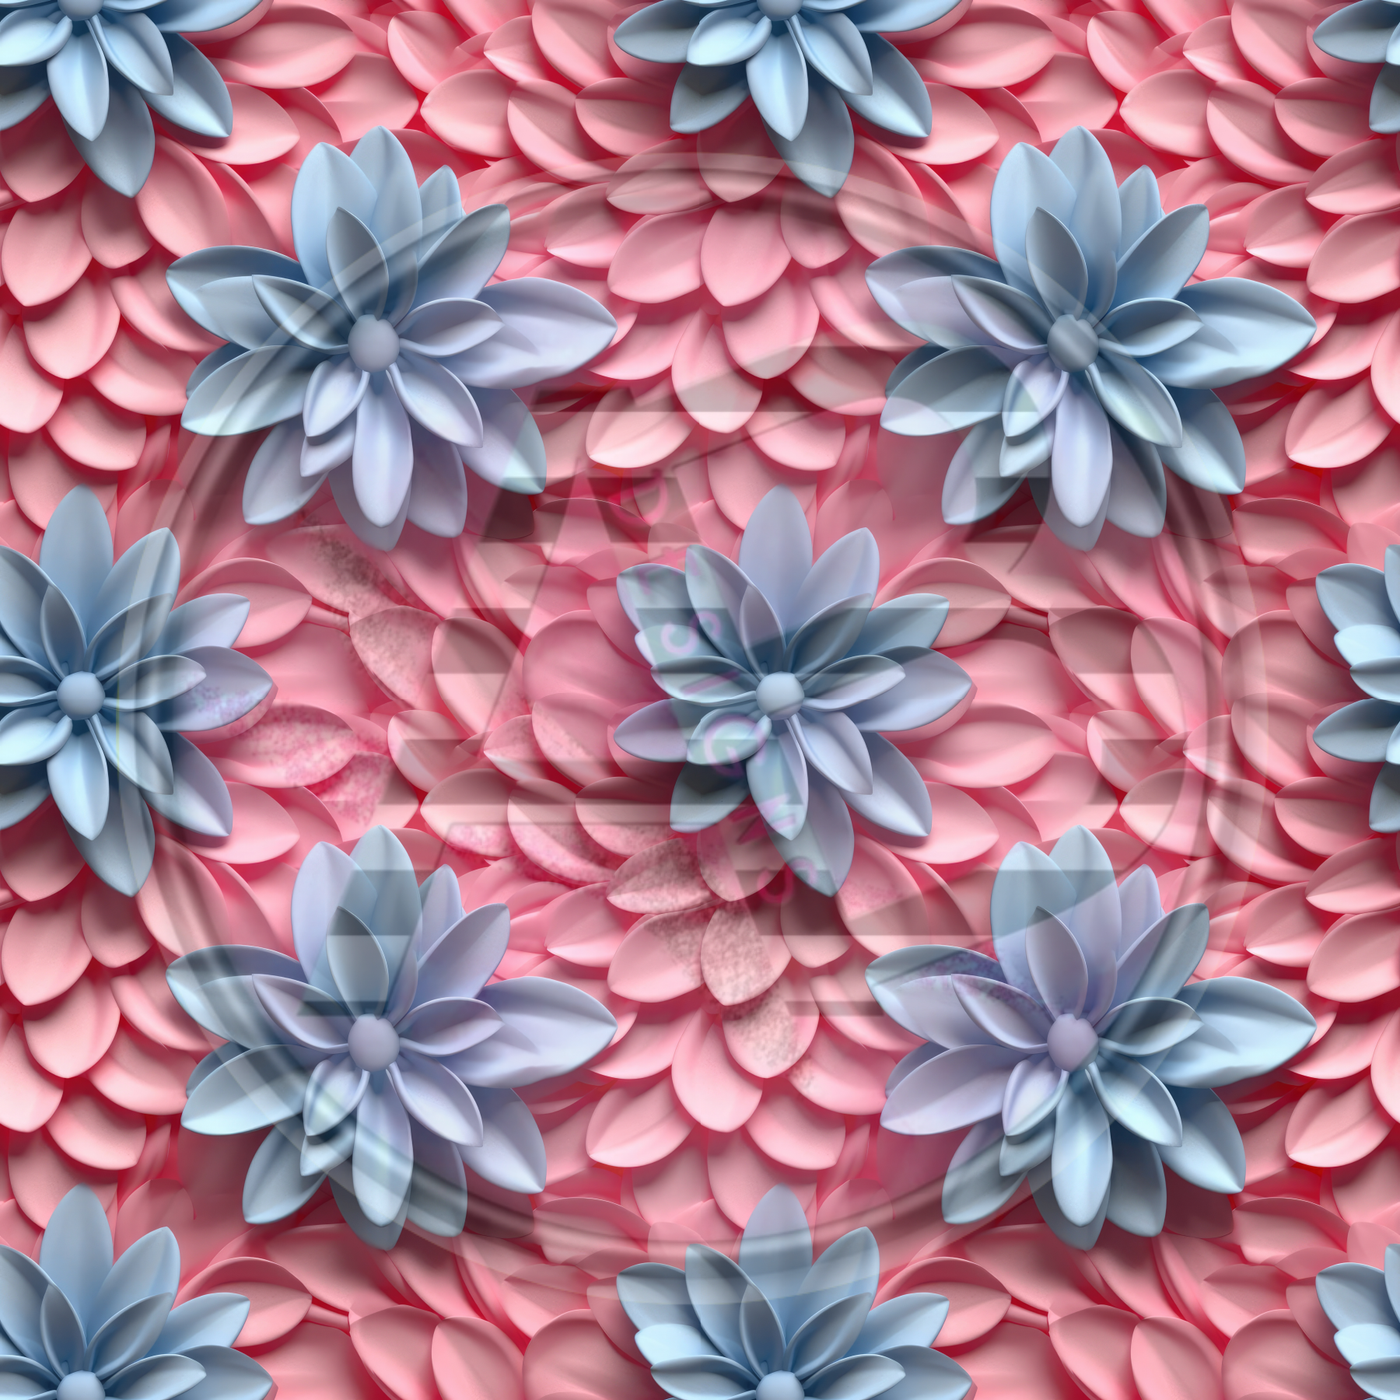 Adhesive Patterned Vinyl - 3D Floral 07 Smaller